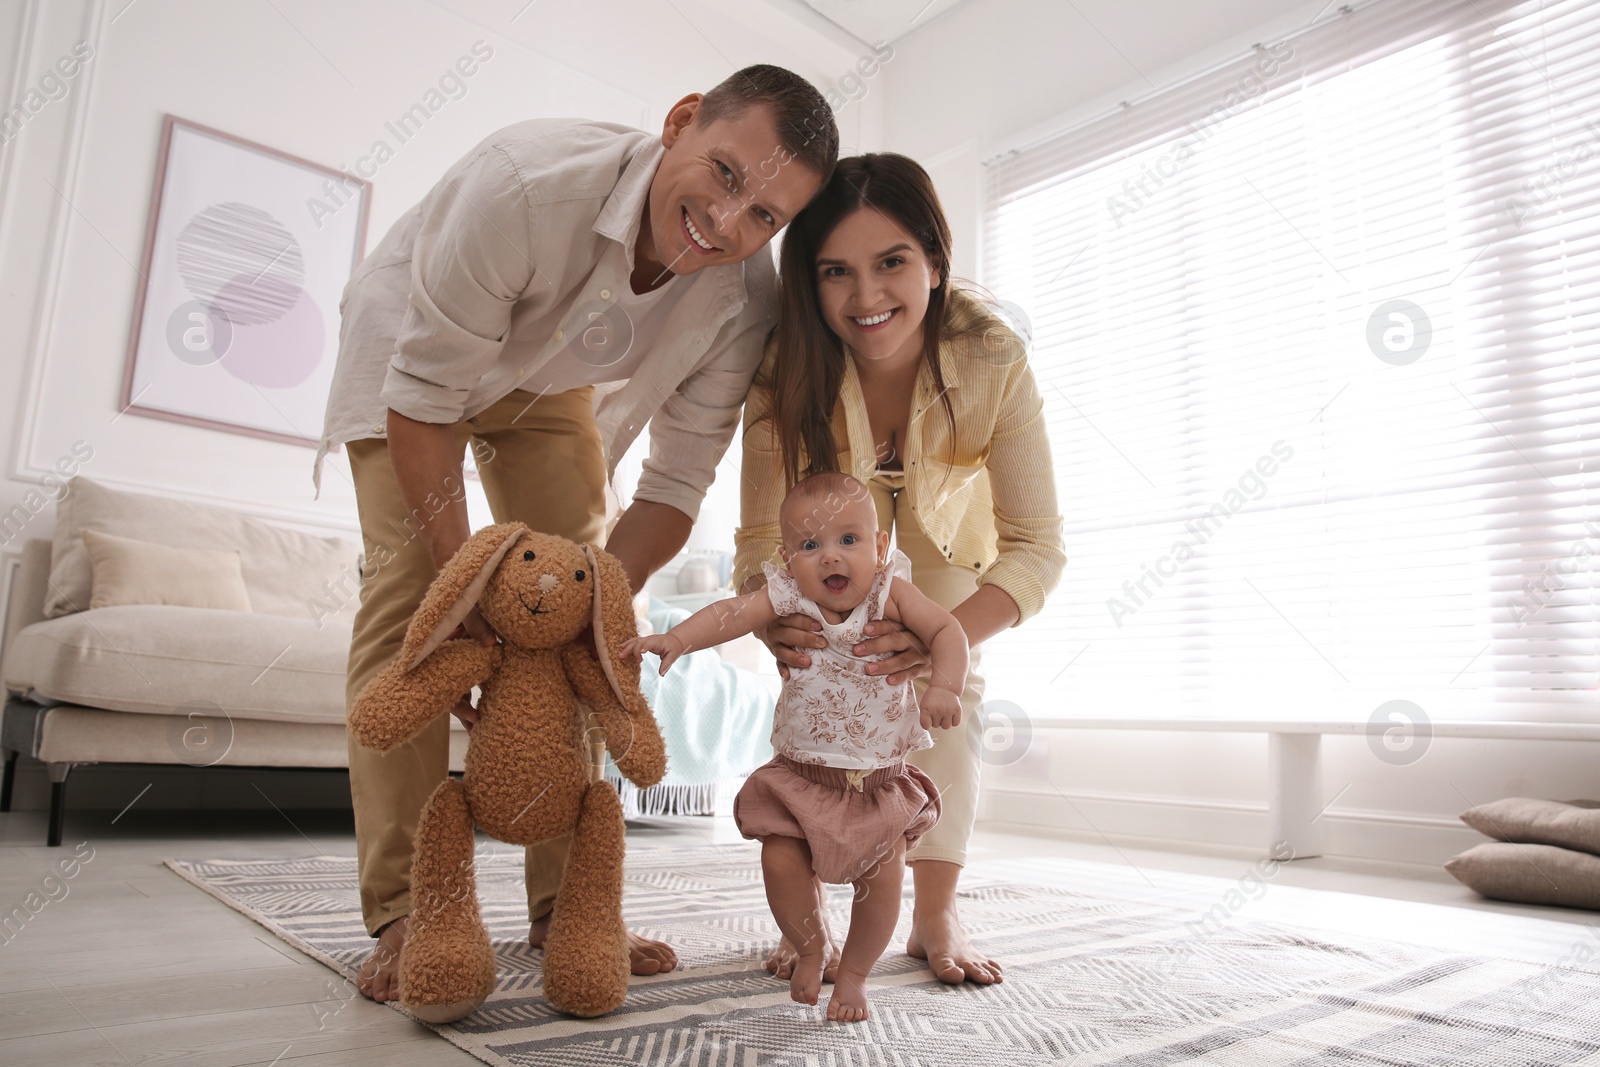 Photo of Cute little baby doing first steps with parents' help at home